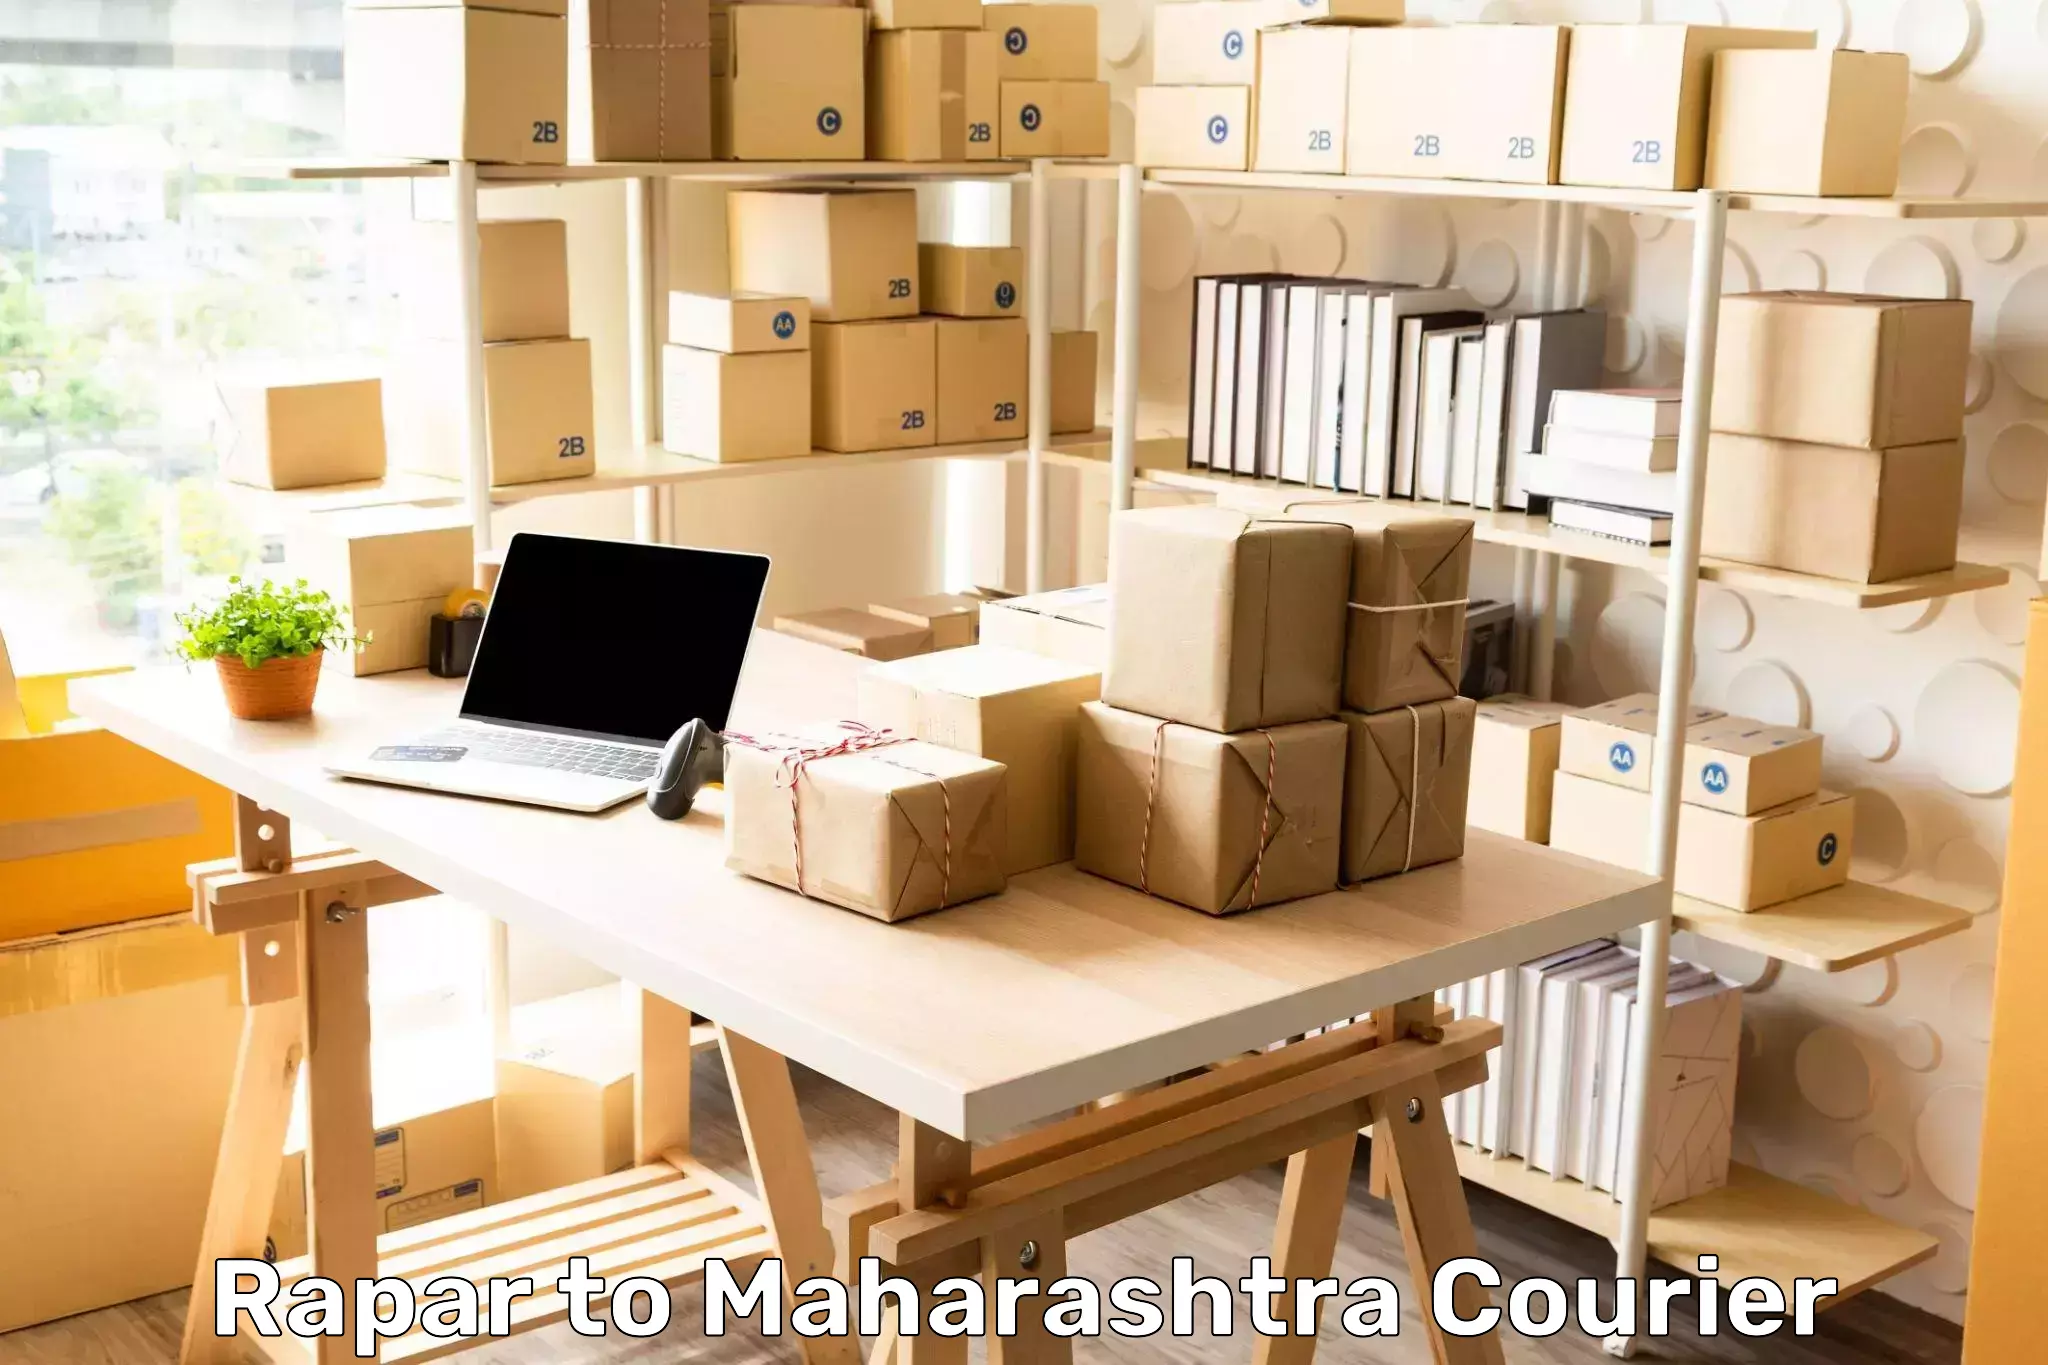 State-of-the-art courier technology Rapar to Bhiwandi